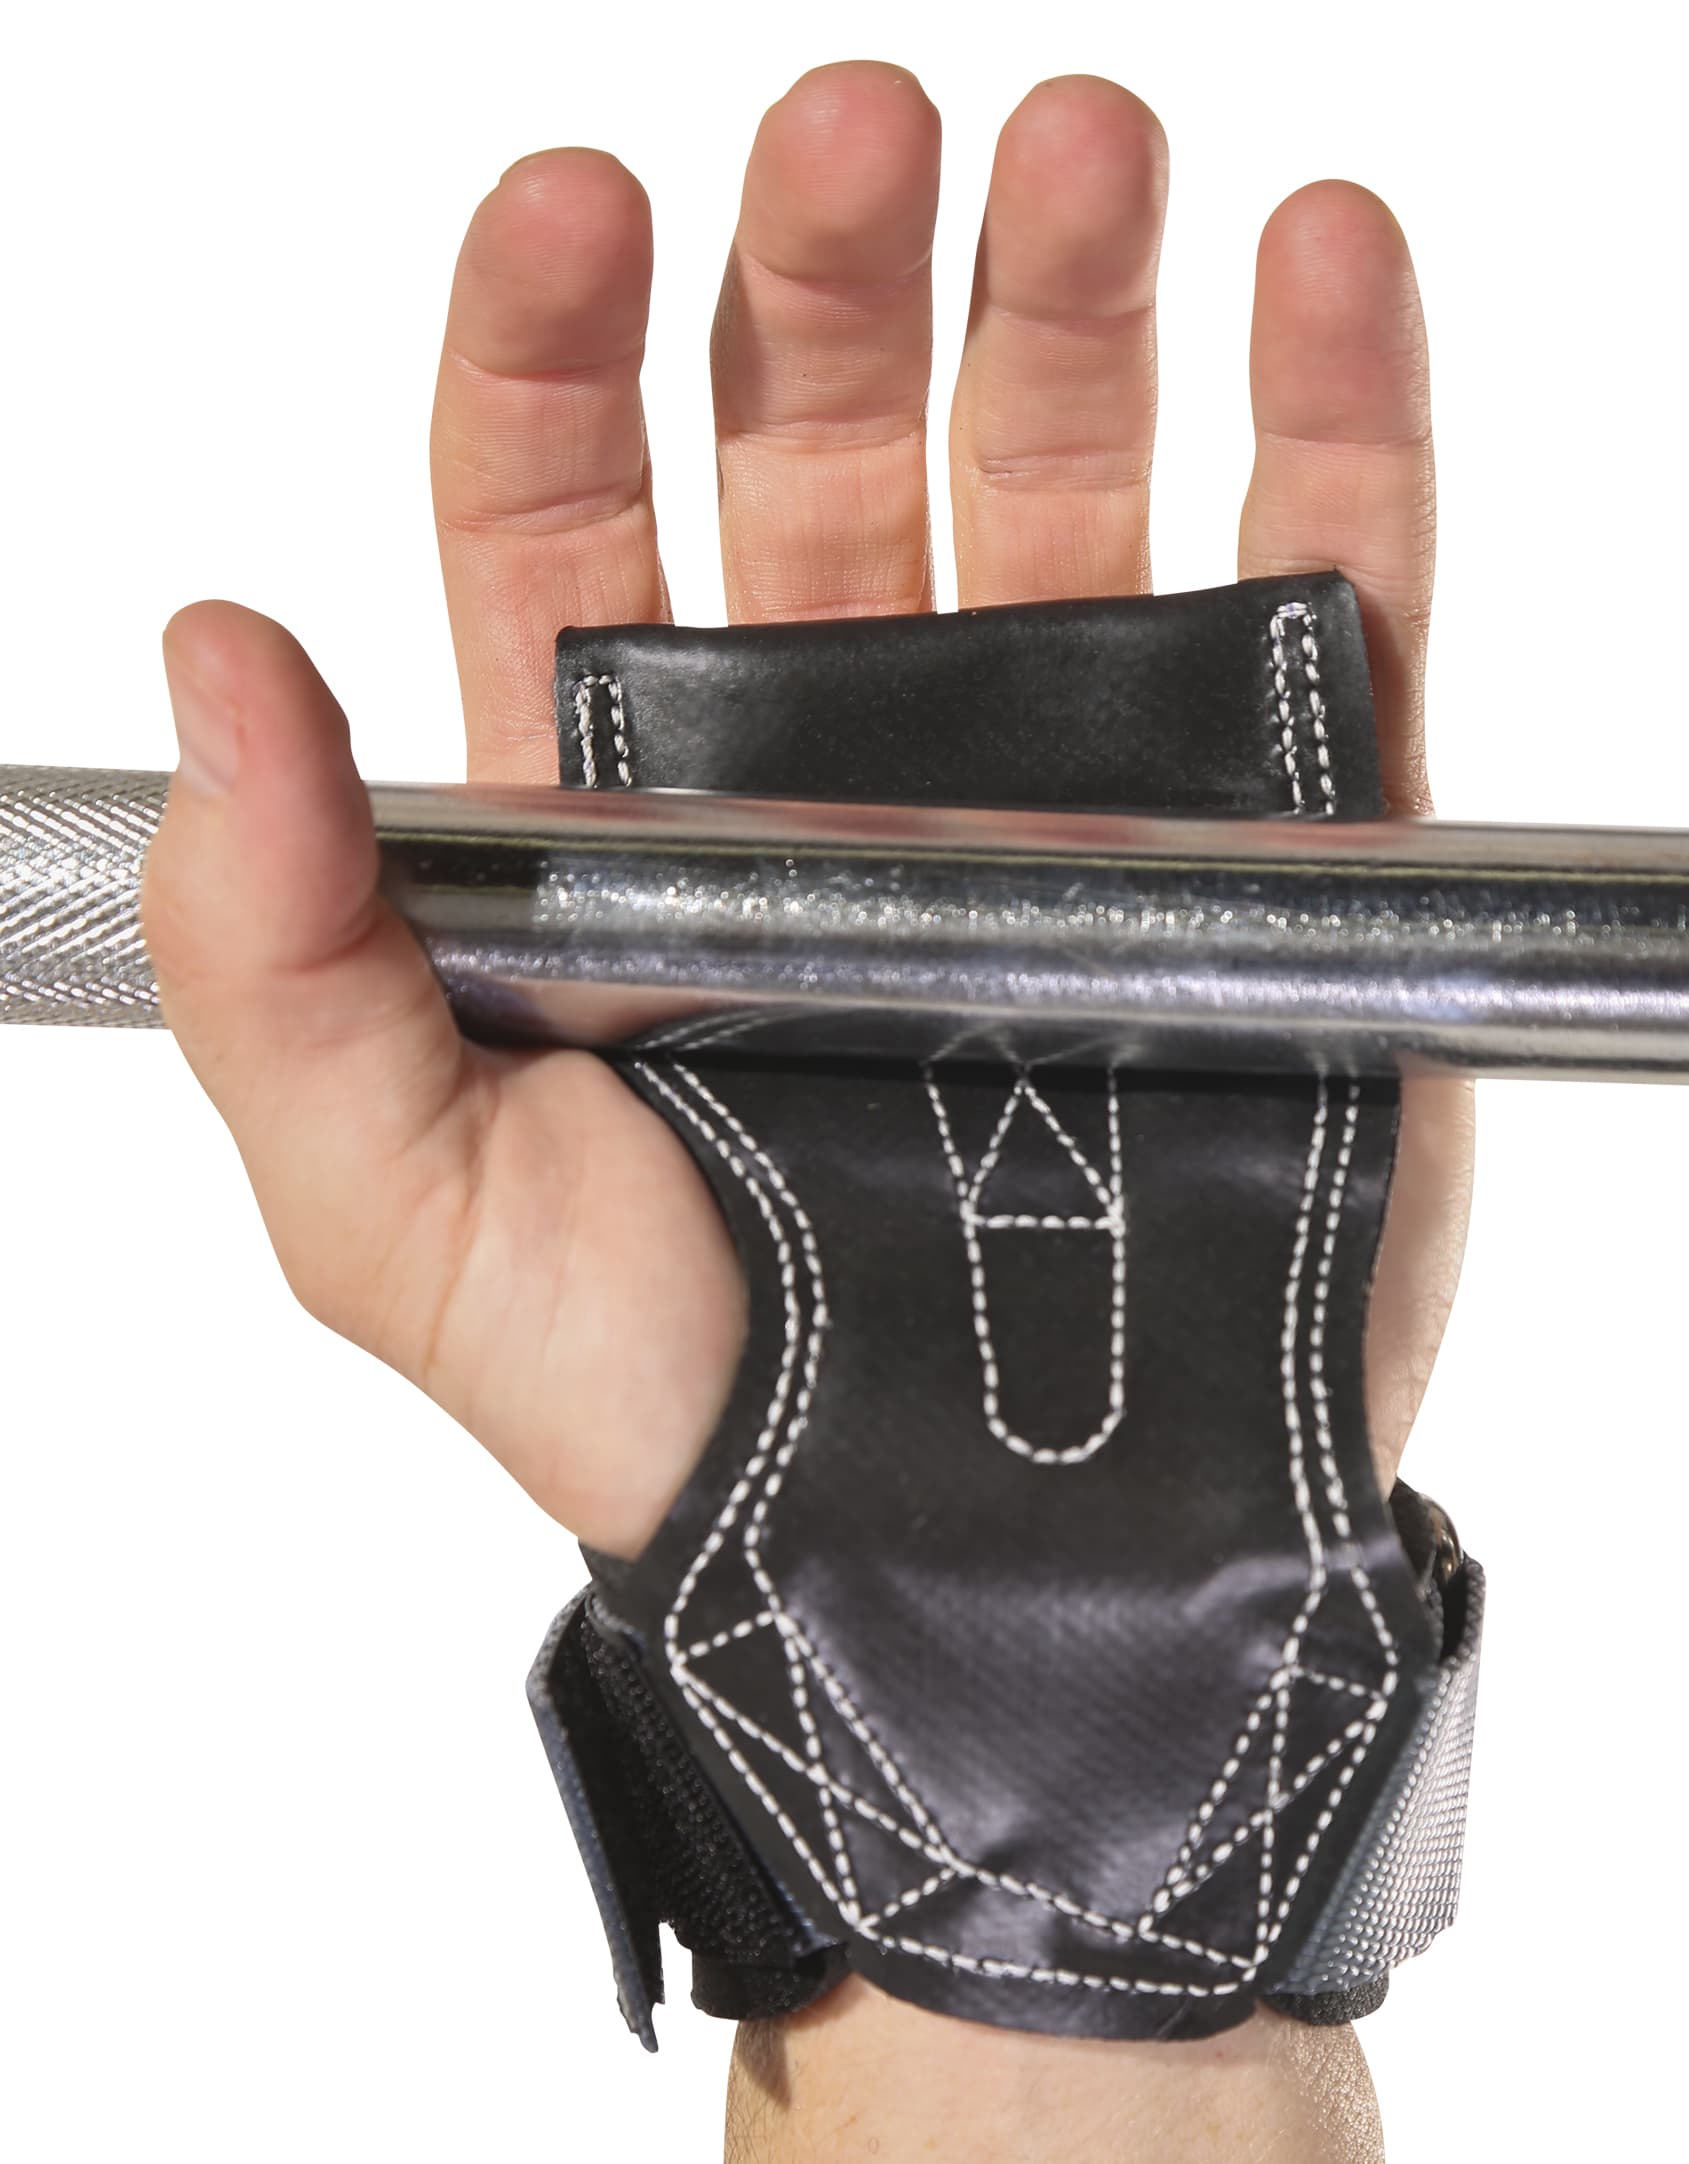 How to Use Versa Gripps Wrist Straps for Lifting